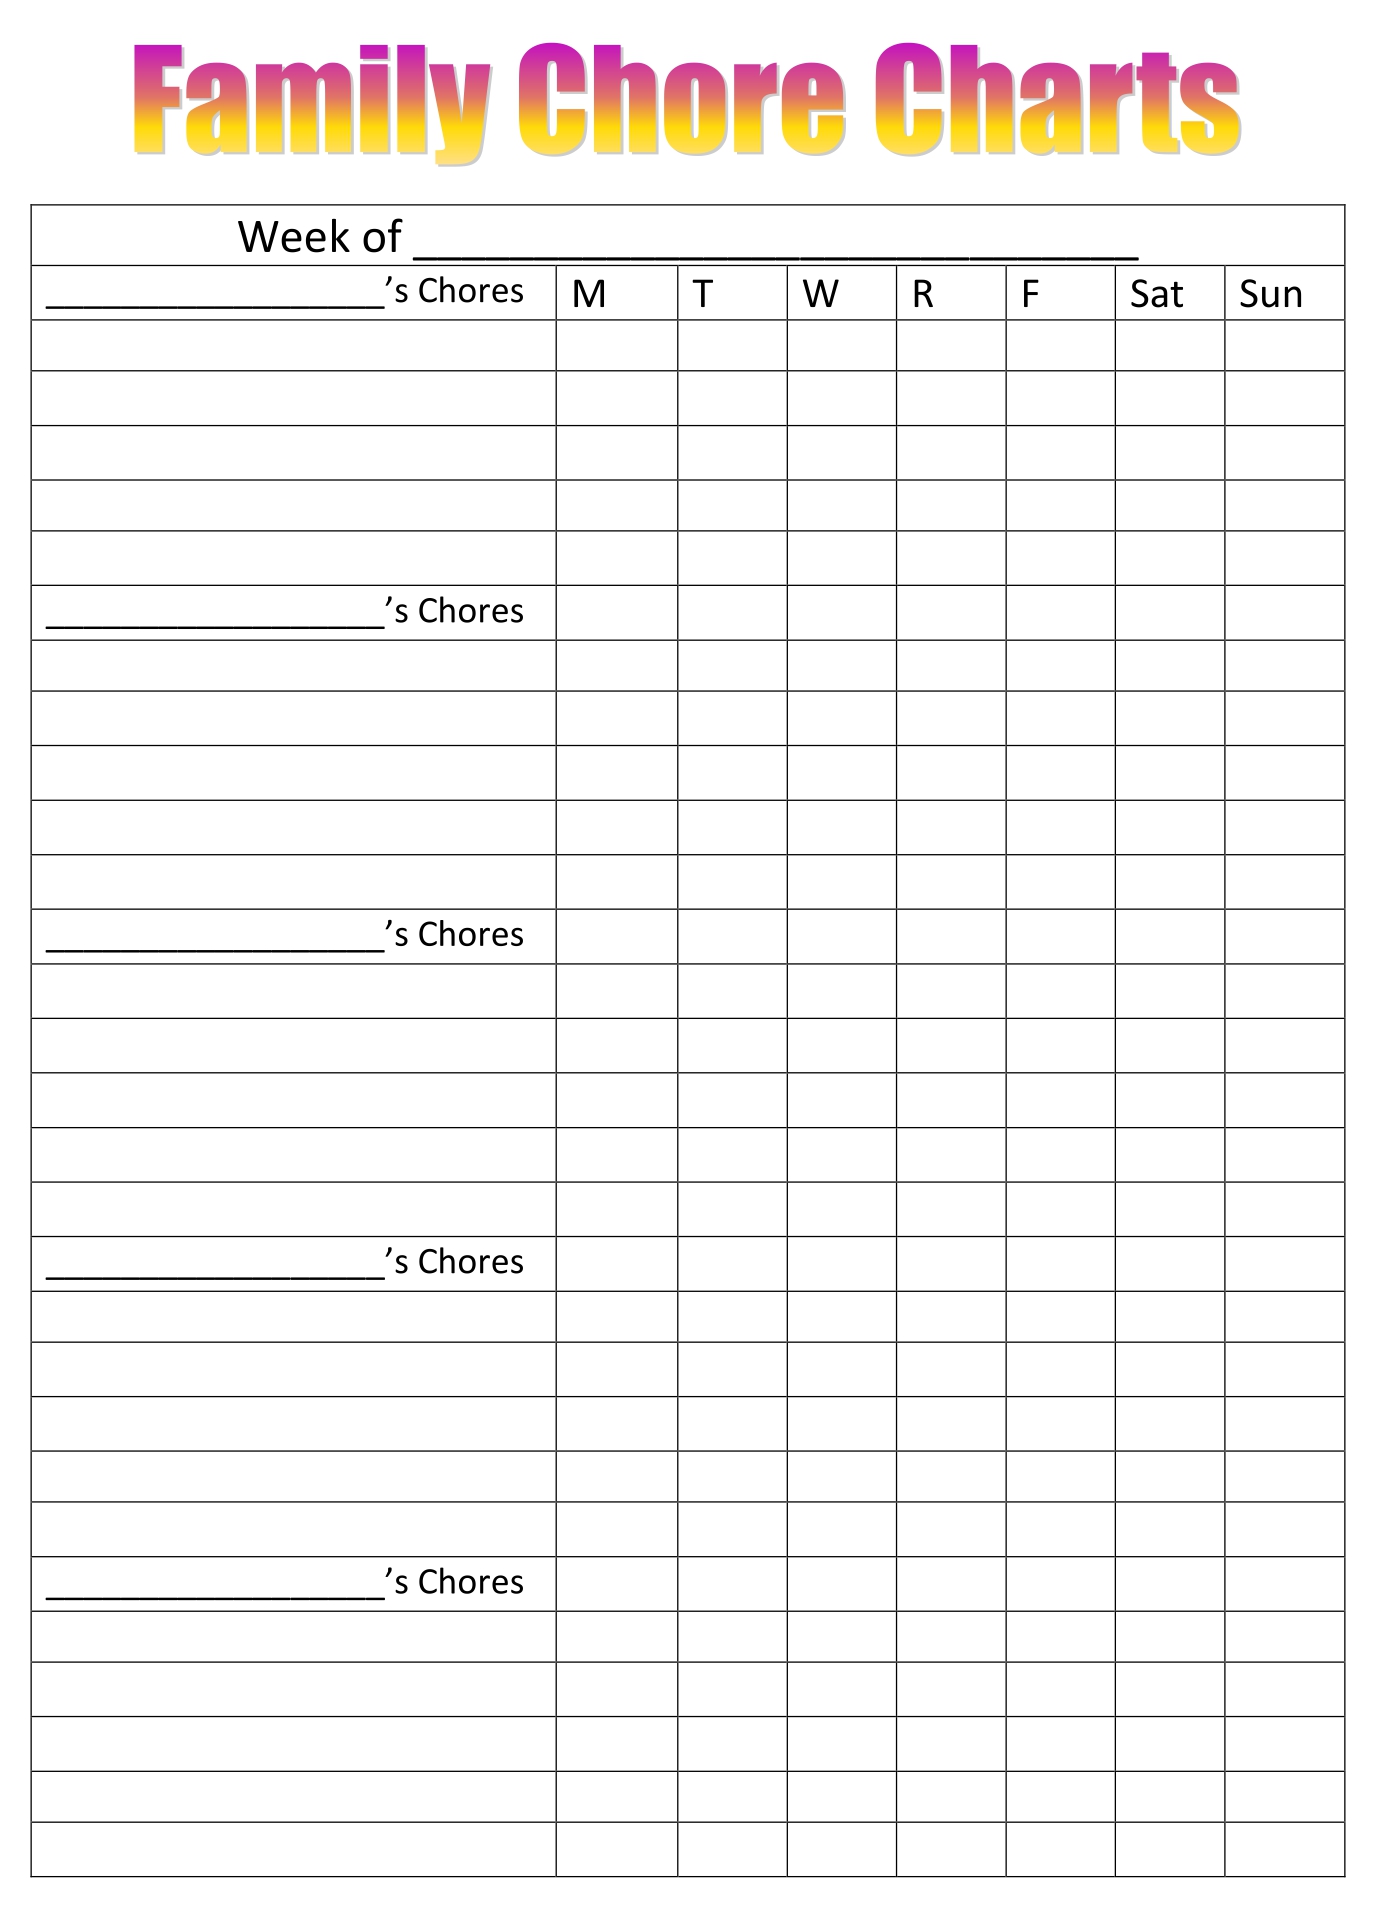 weekly-chore-chart-template-24-free-word-excel-pdf-format-download